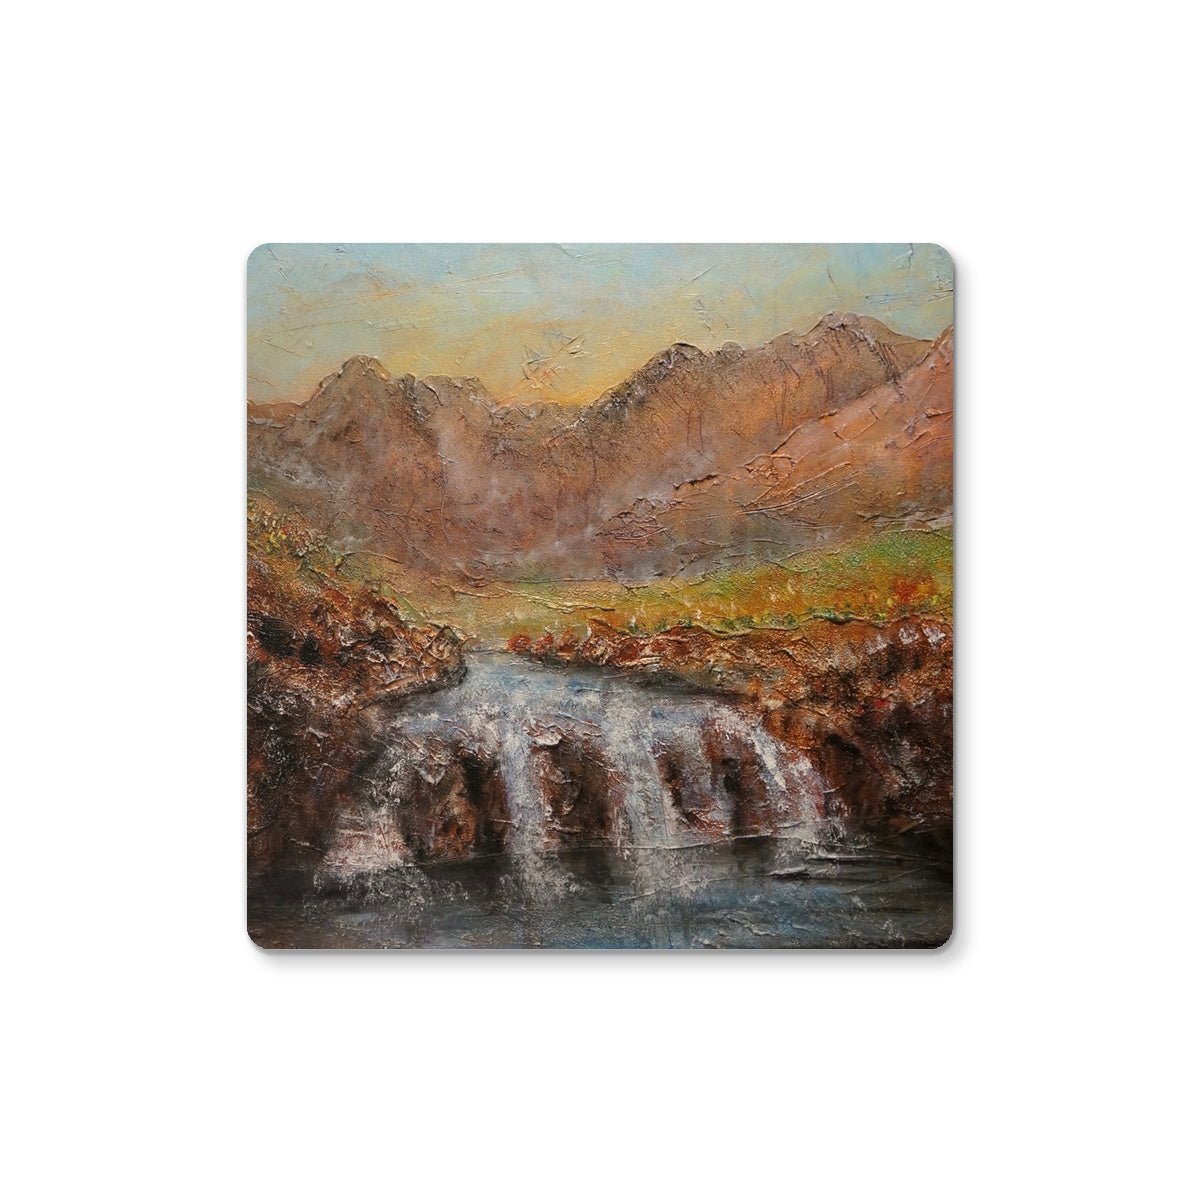 Fairy Pools Dawn Skye Art Gifts Coaster-Coasters-Skye Art Gallery-2 Coasters-Paintings, Prints, Homeware, Art Gifts From Scotland By Scottish Artist Kevin Hunter